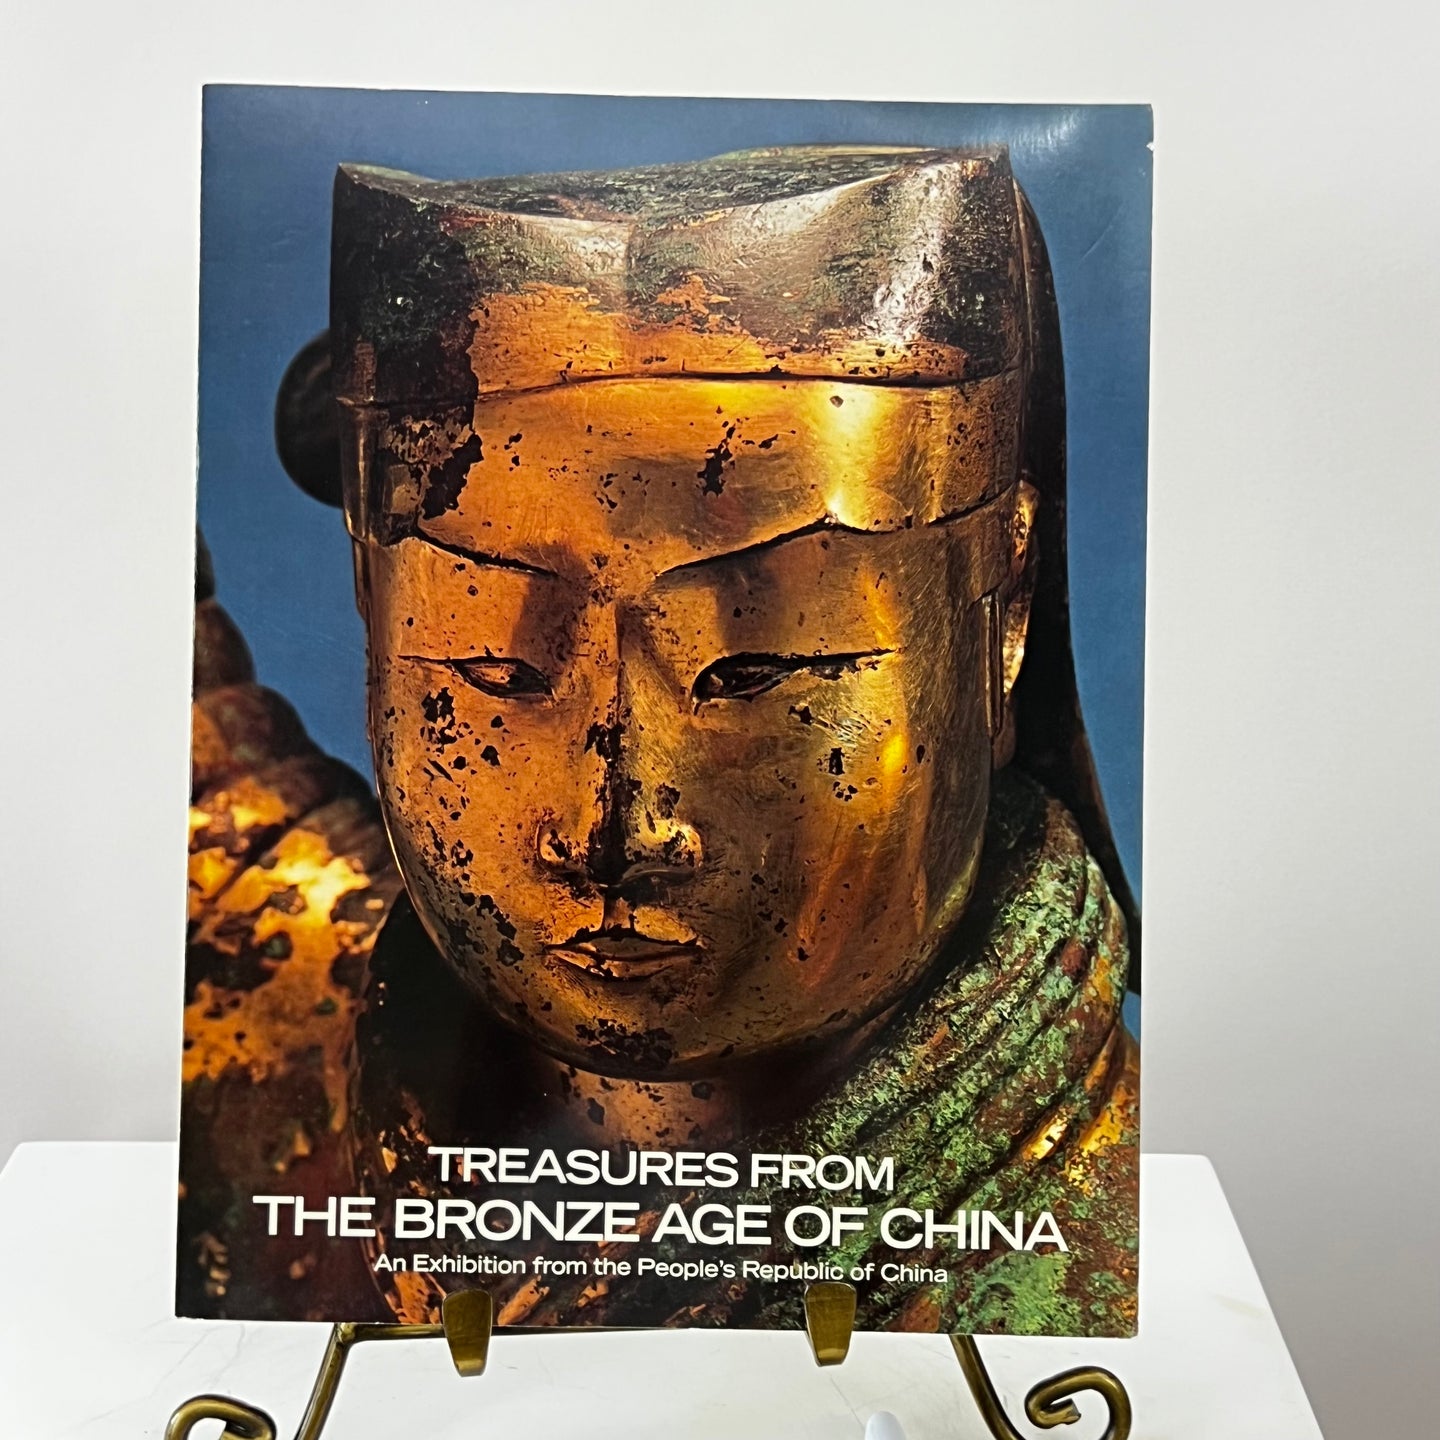 Treasures from the Great Bronze Age of China